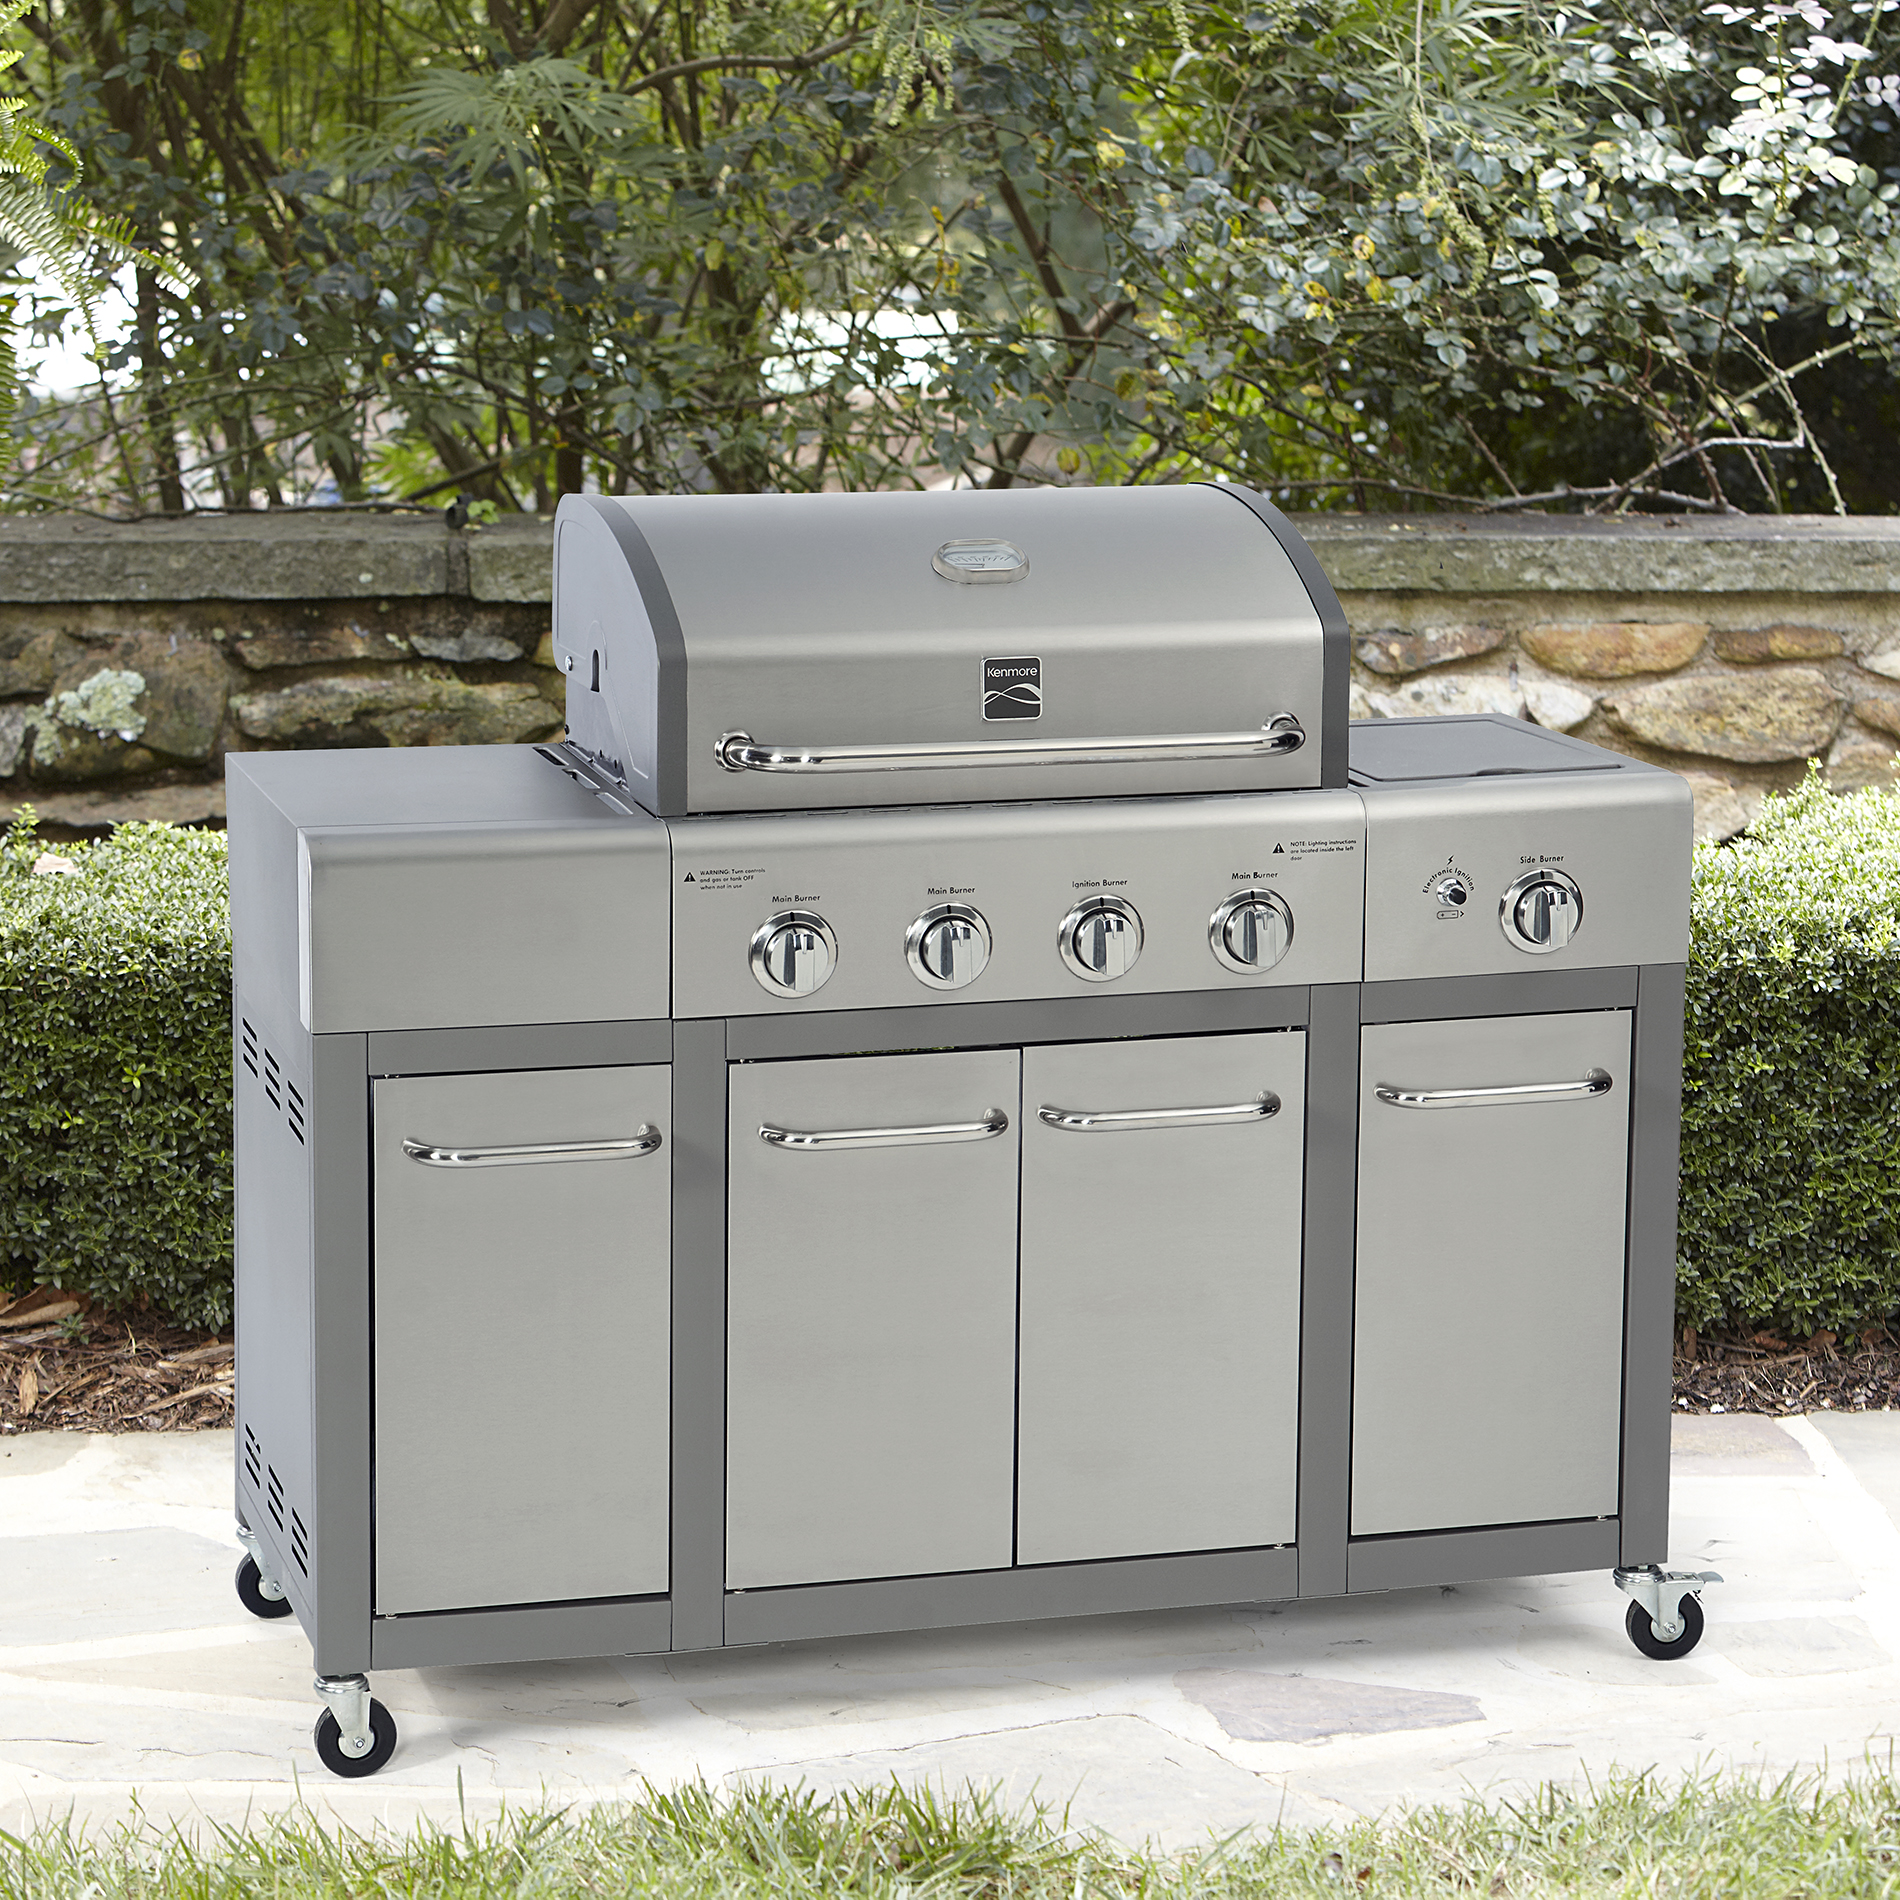 Kenmore 4 Burner Gas Grill With Storage Stainless Steel